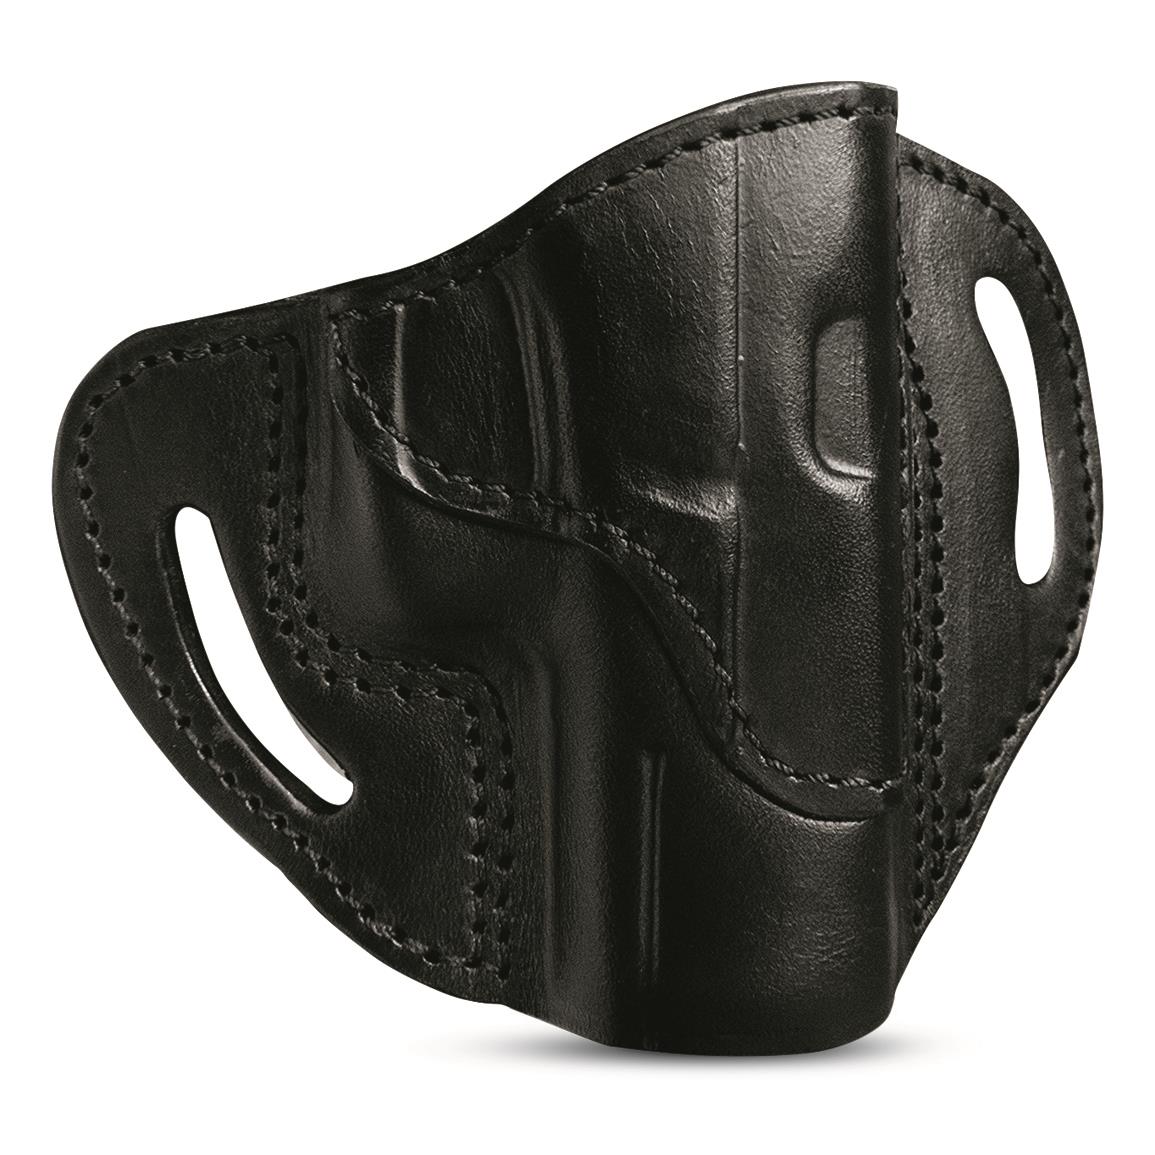 Tagua TX-Cannon Black Leather Multi-Fit OWB Holster, Smith & Wesson M&P Shield/M2.0 3" Barrel